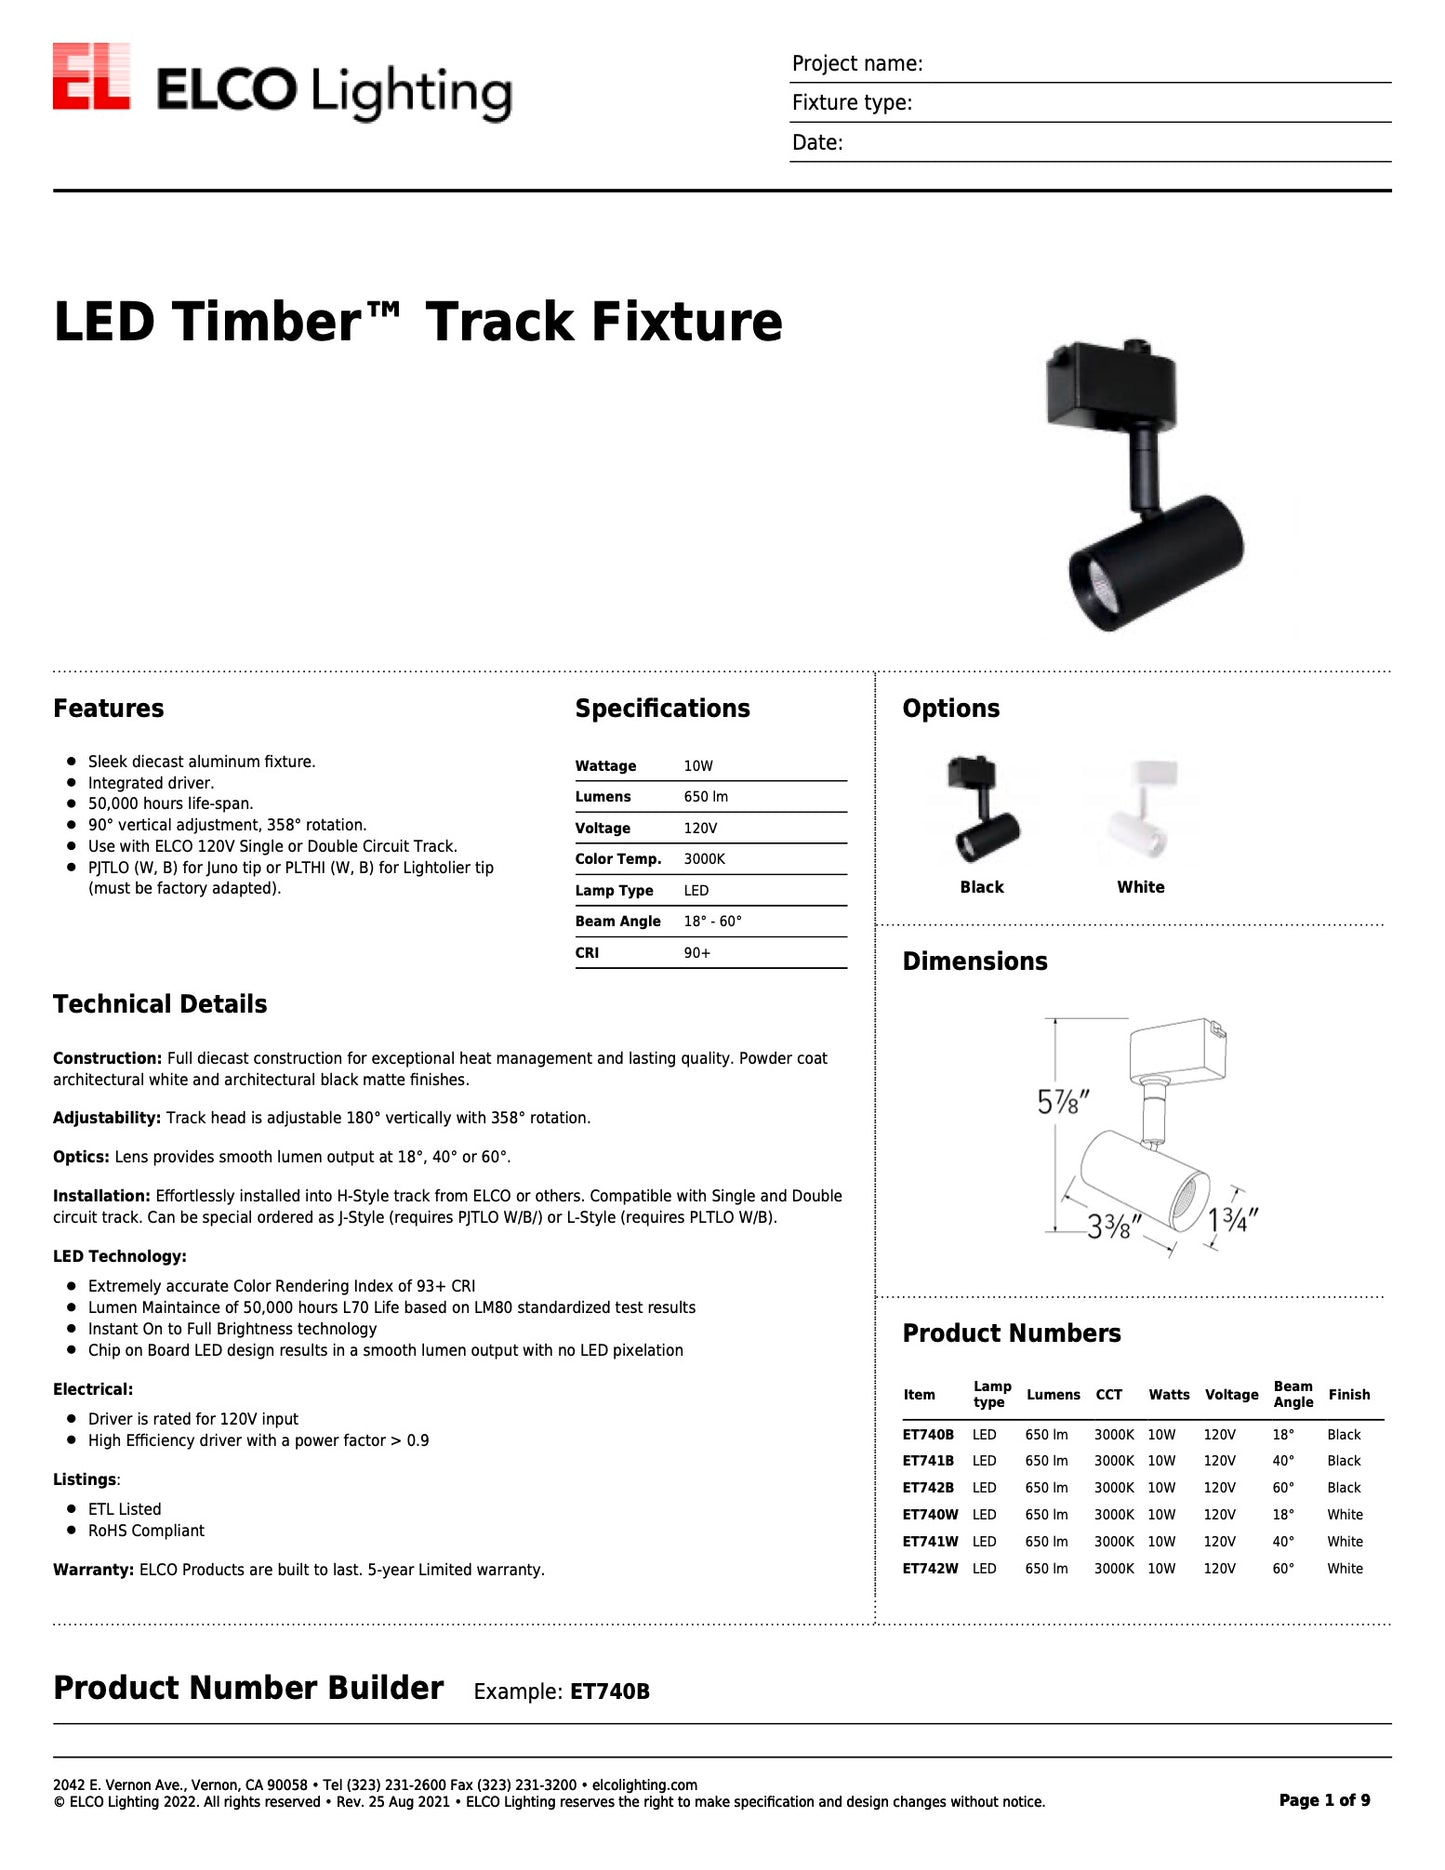 Elco LED Timber Track Fixture